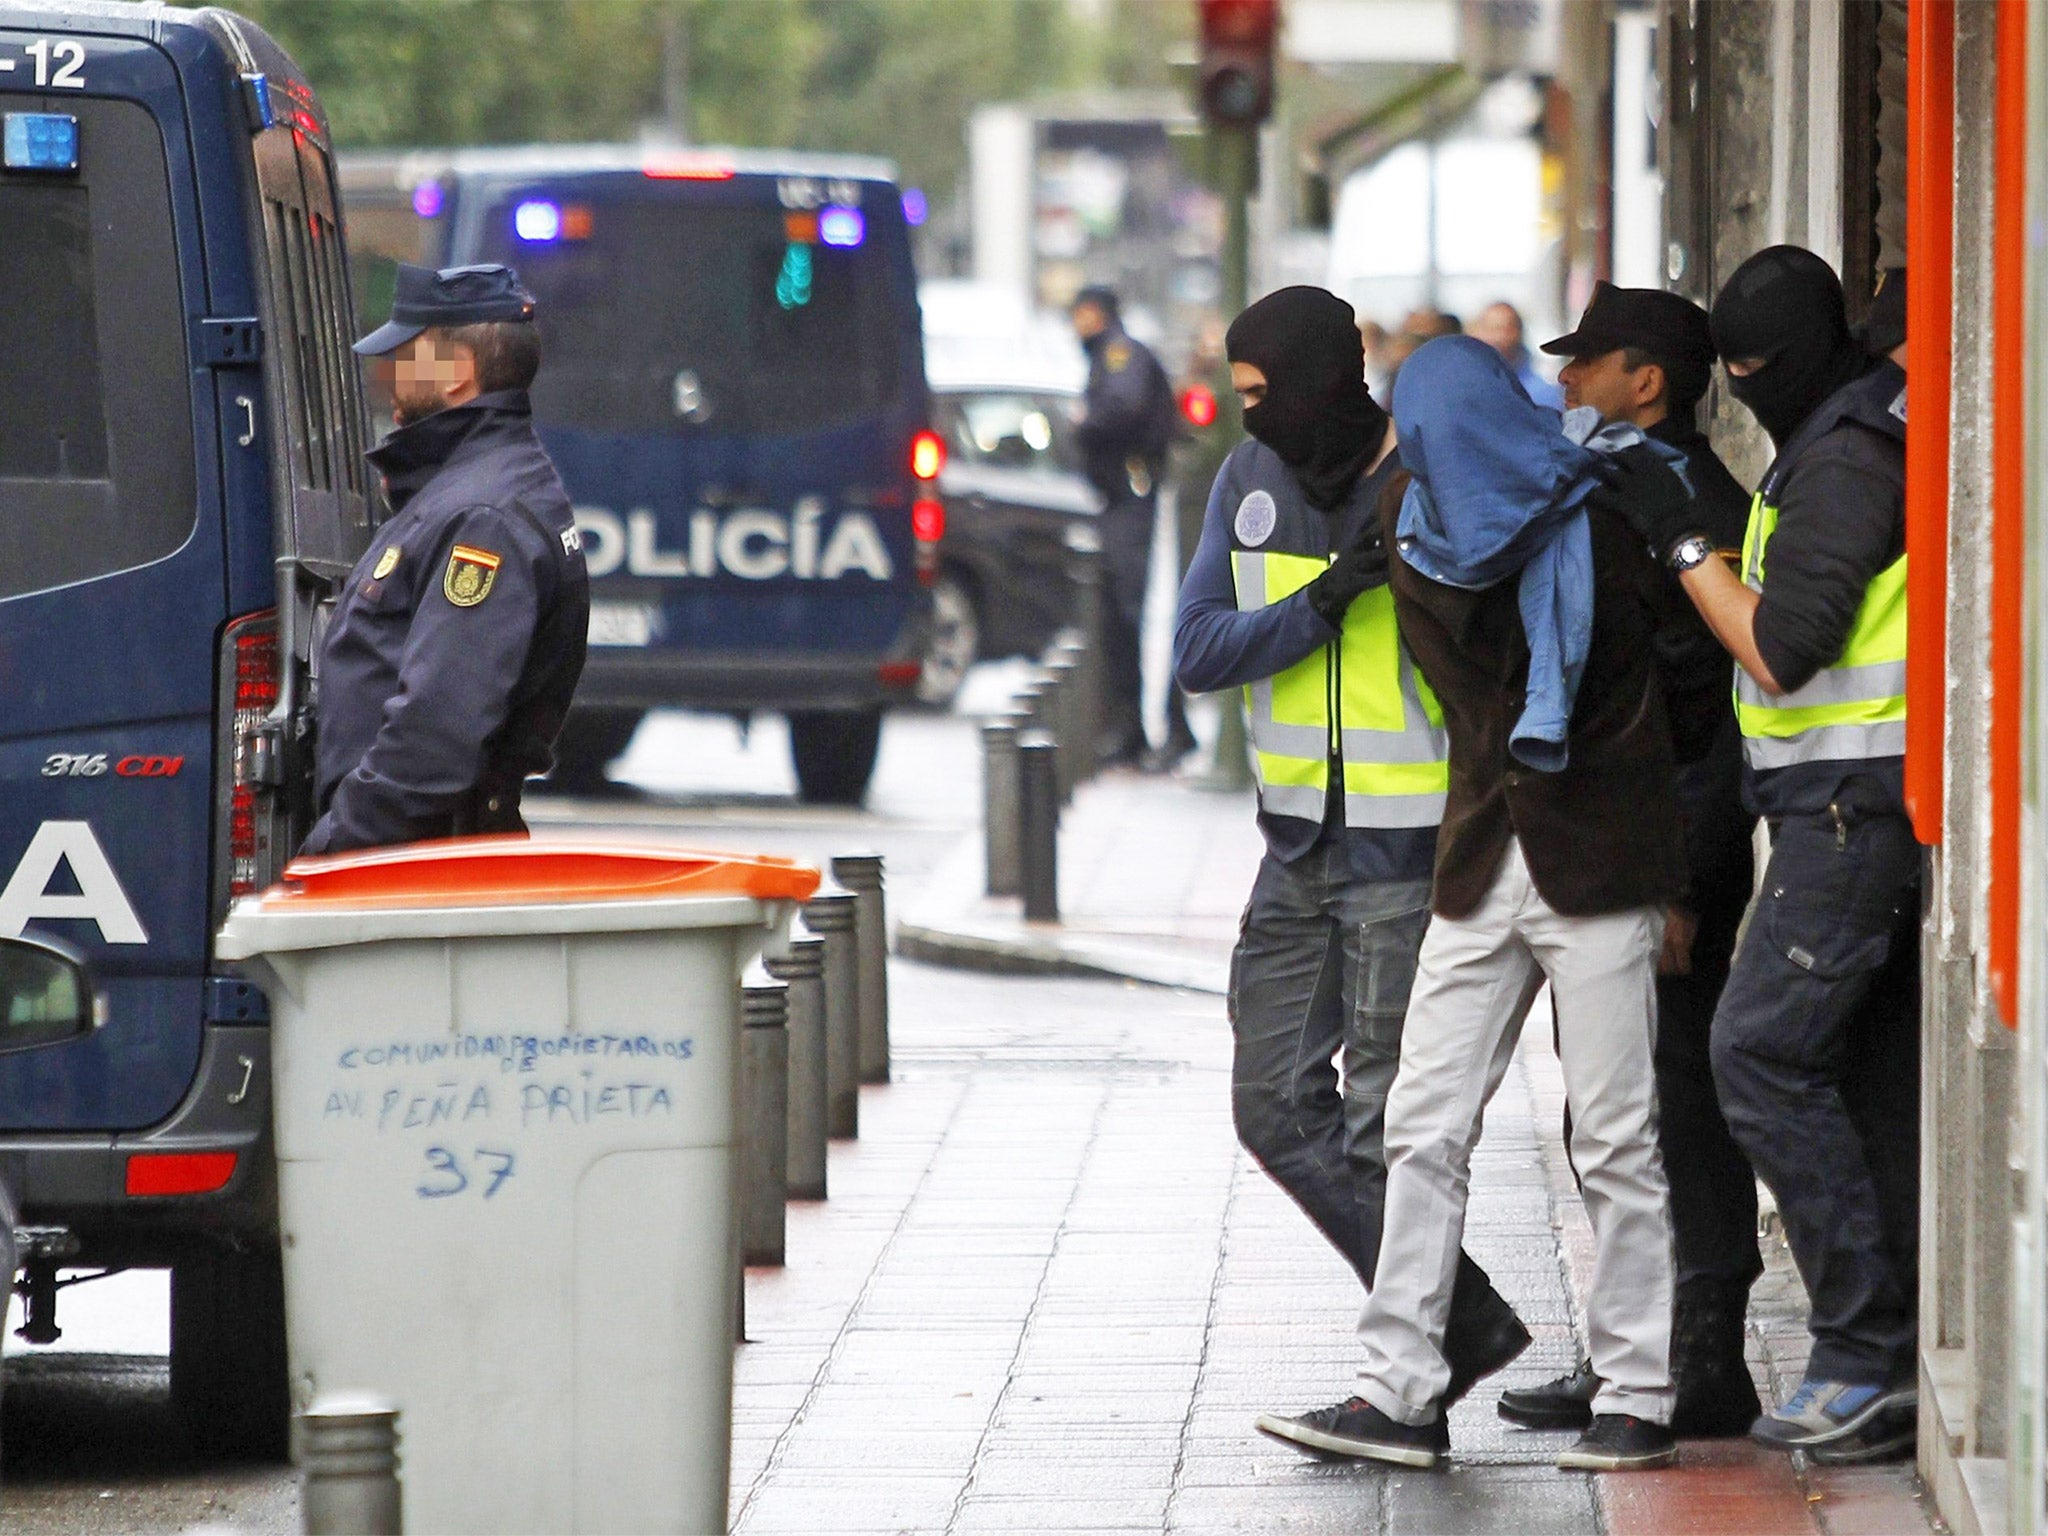 Police arrest one of the men accused of having links to Isis, in Madrid on Tuesday